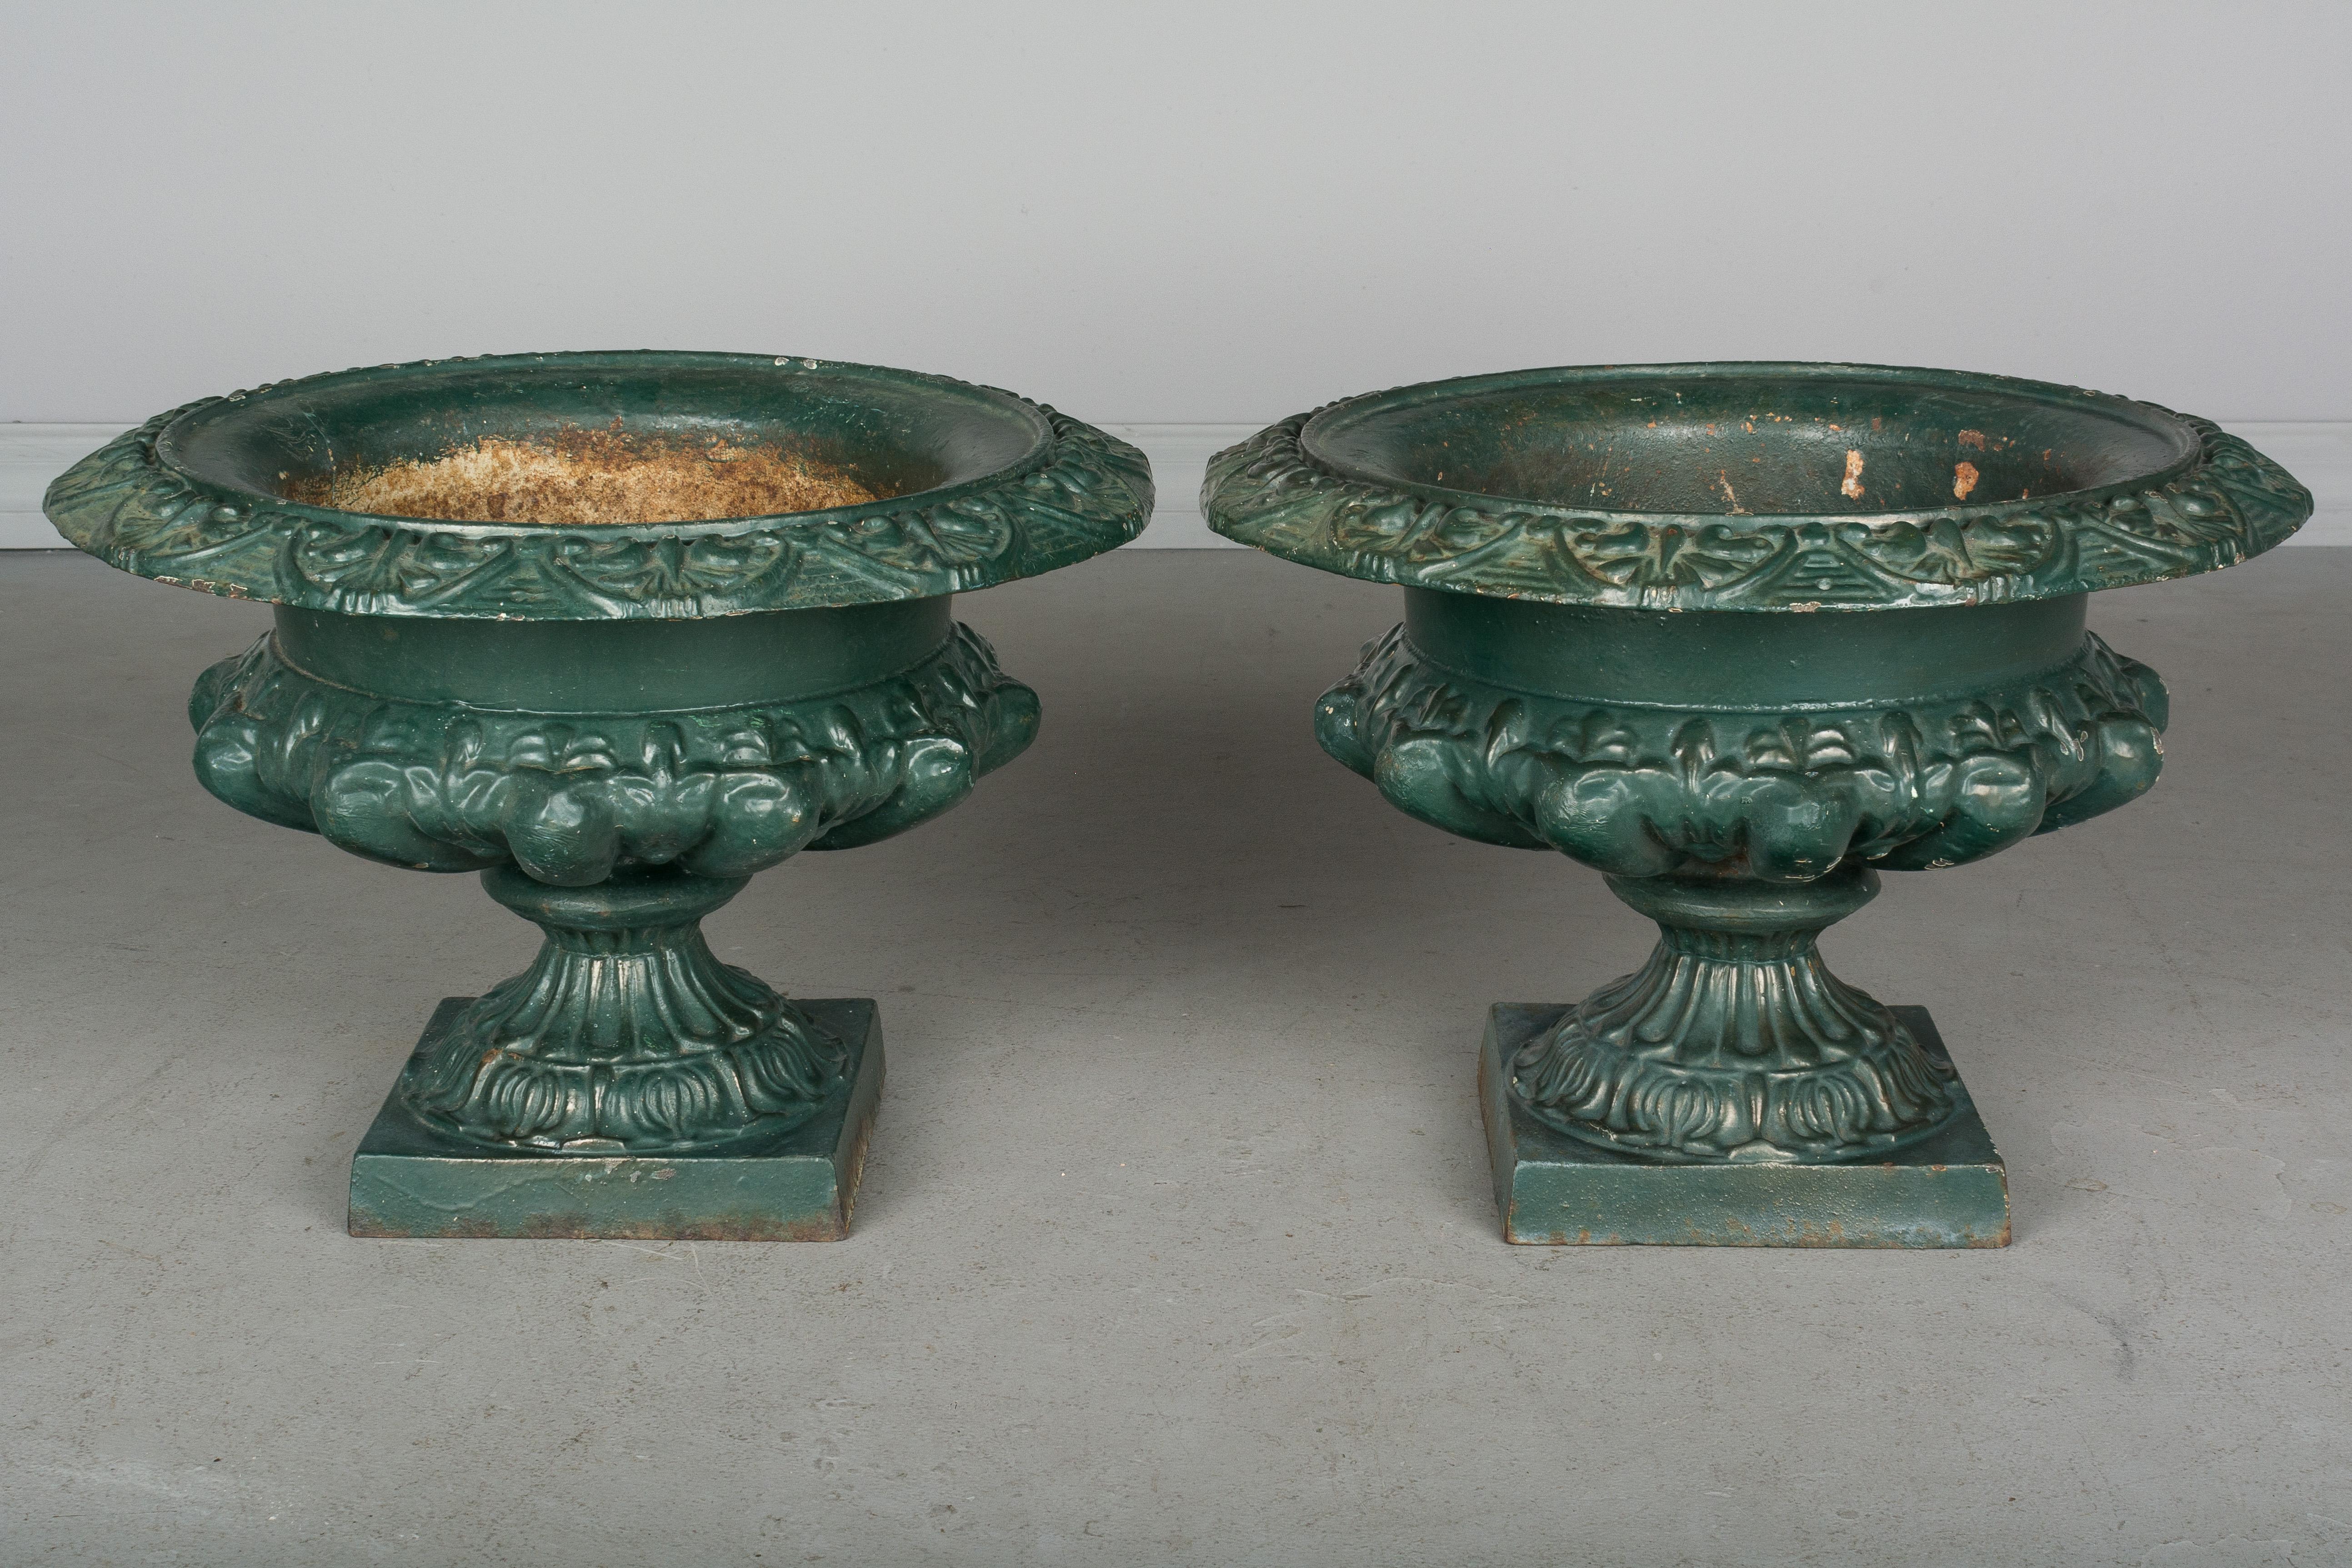 A pair of 19th century French cast iron garden urn planters, with original weathered green painted patina. Weight: 40 lbs. each. 11.5